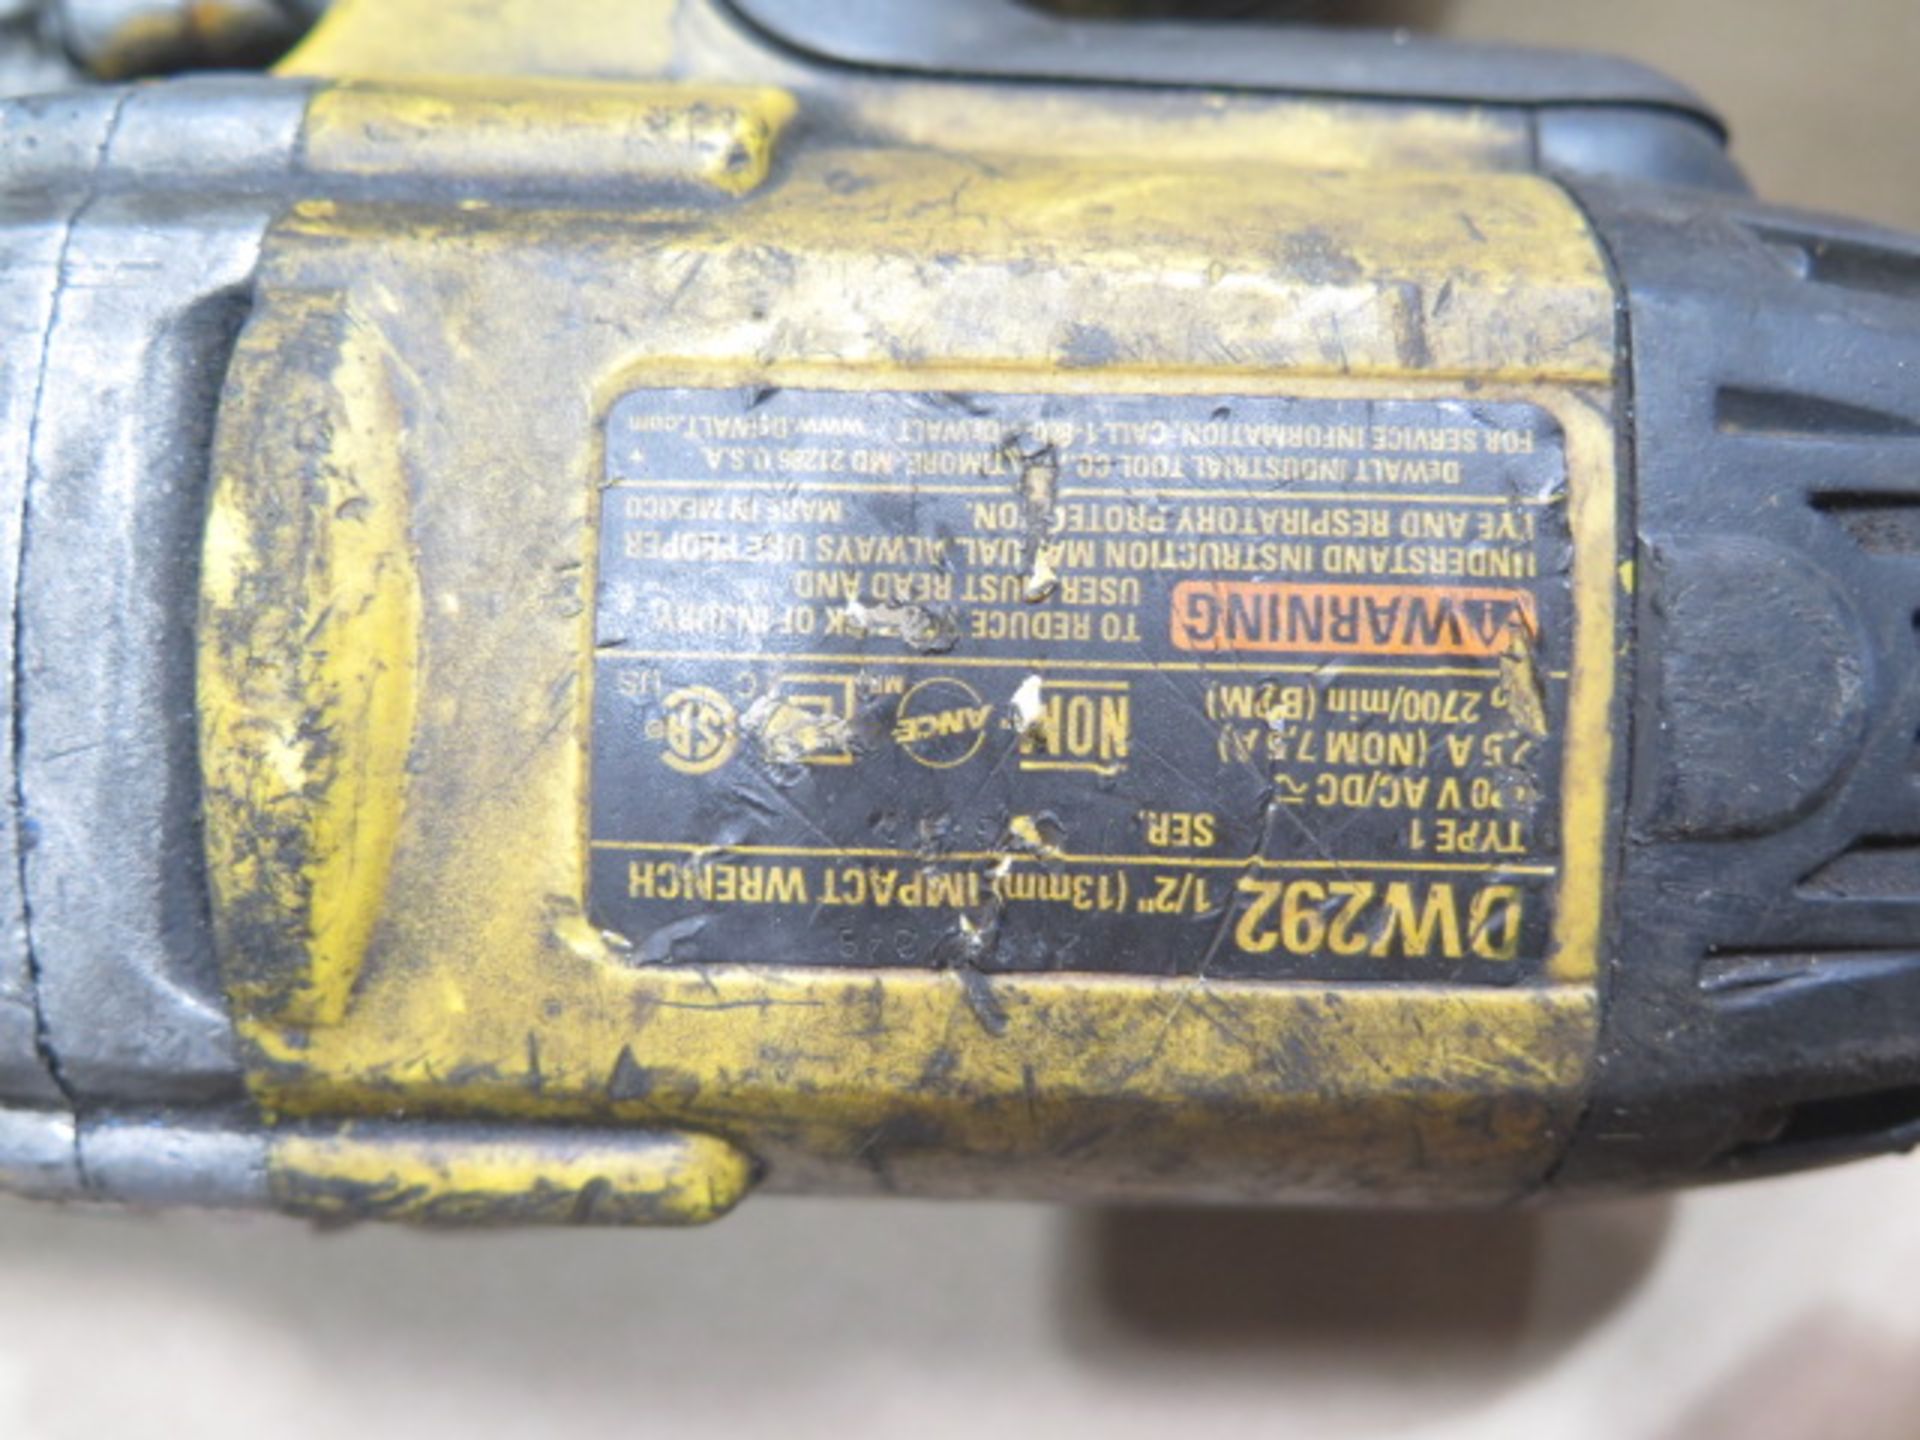 DeWalt 1/2" Electric Impacts (2) (SOLD AS-IS - NO WARRANTY) - Image 4 of 4